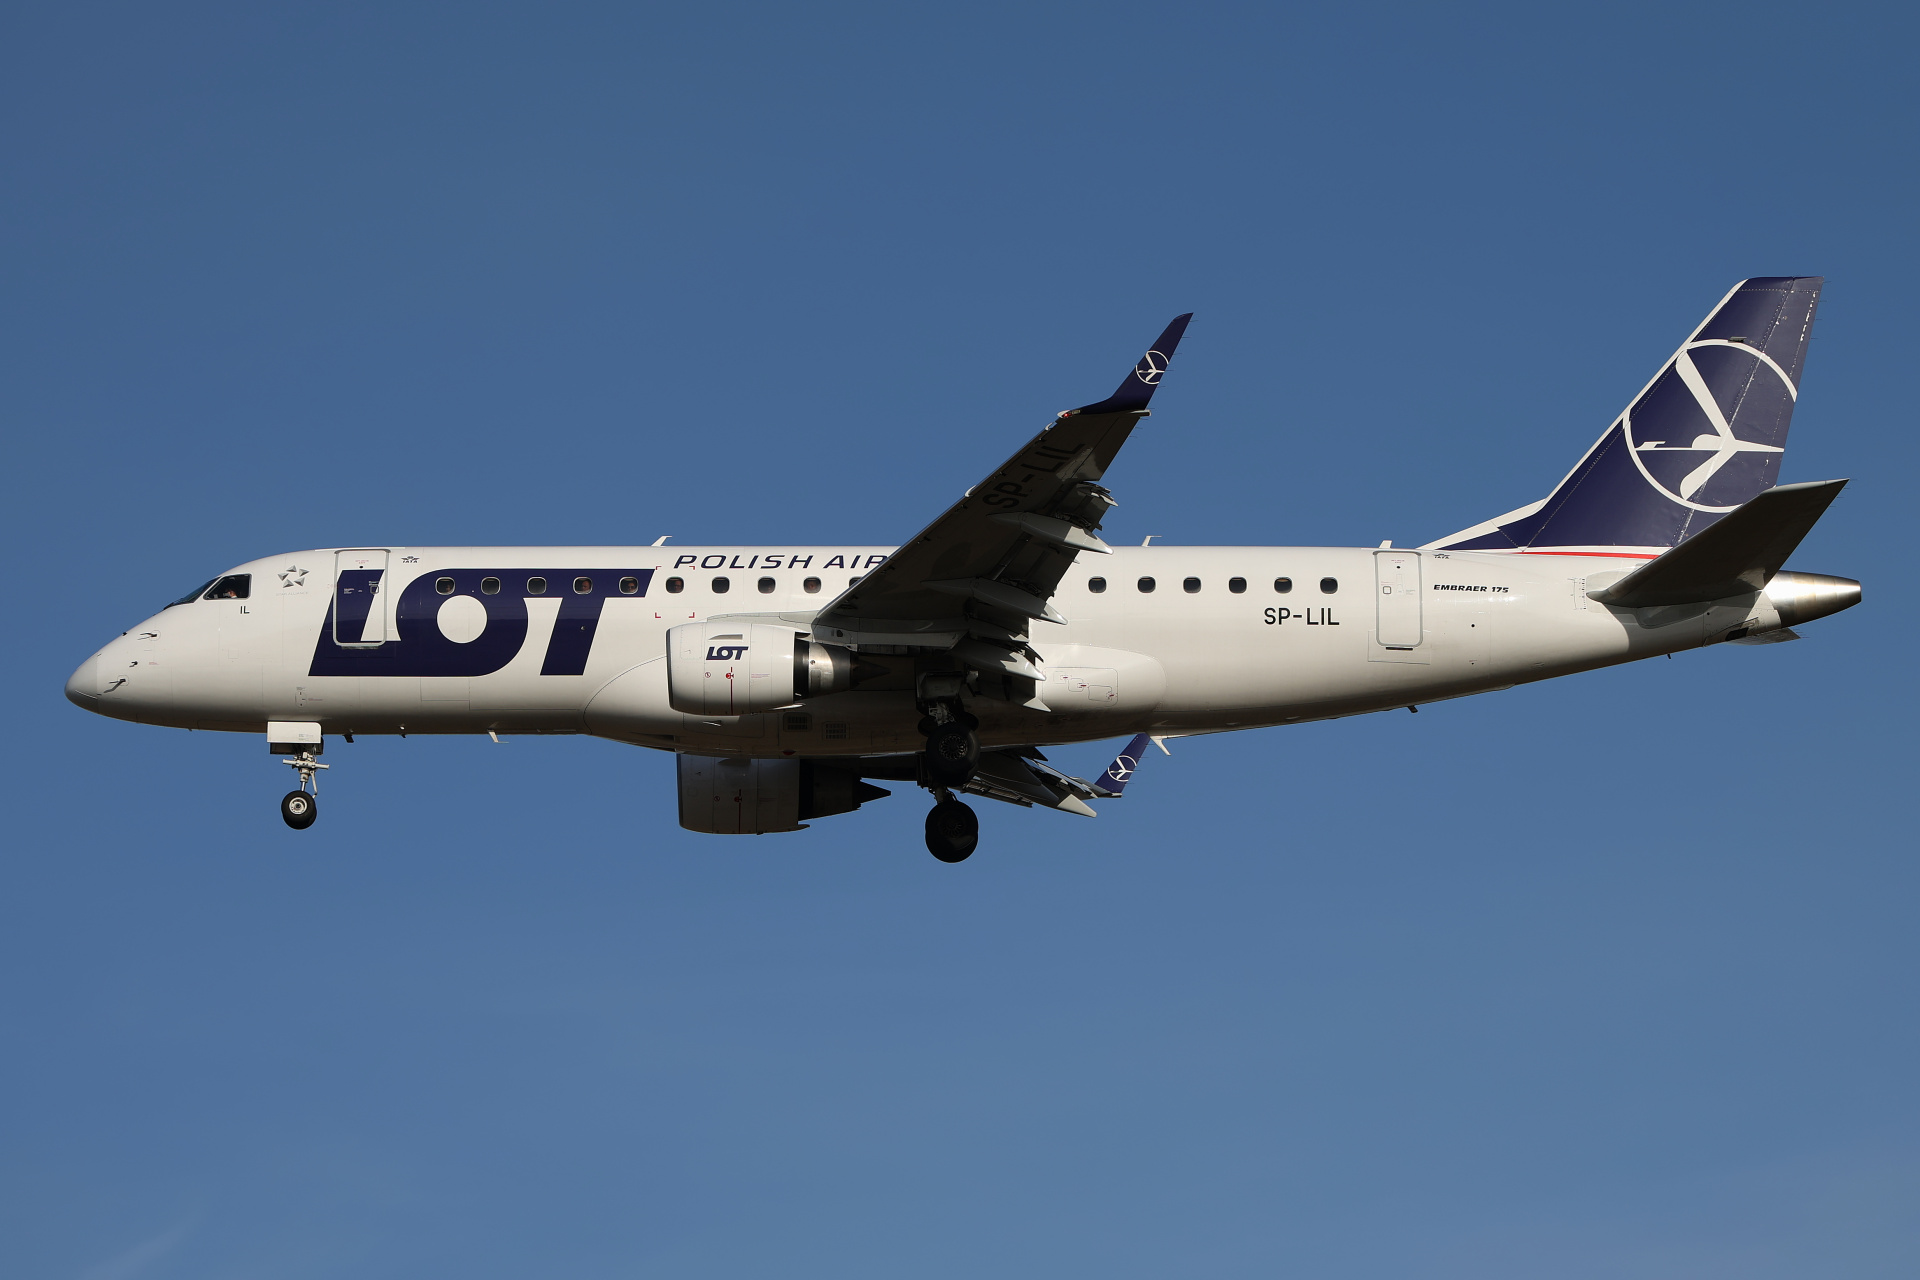 SP-LIL (new livery) (Aircraft » EPWA Spotting » Embraer E175 » LOT Polish Airlines)